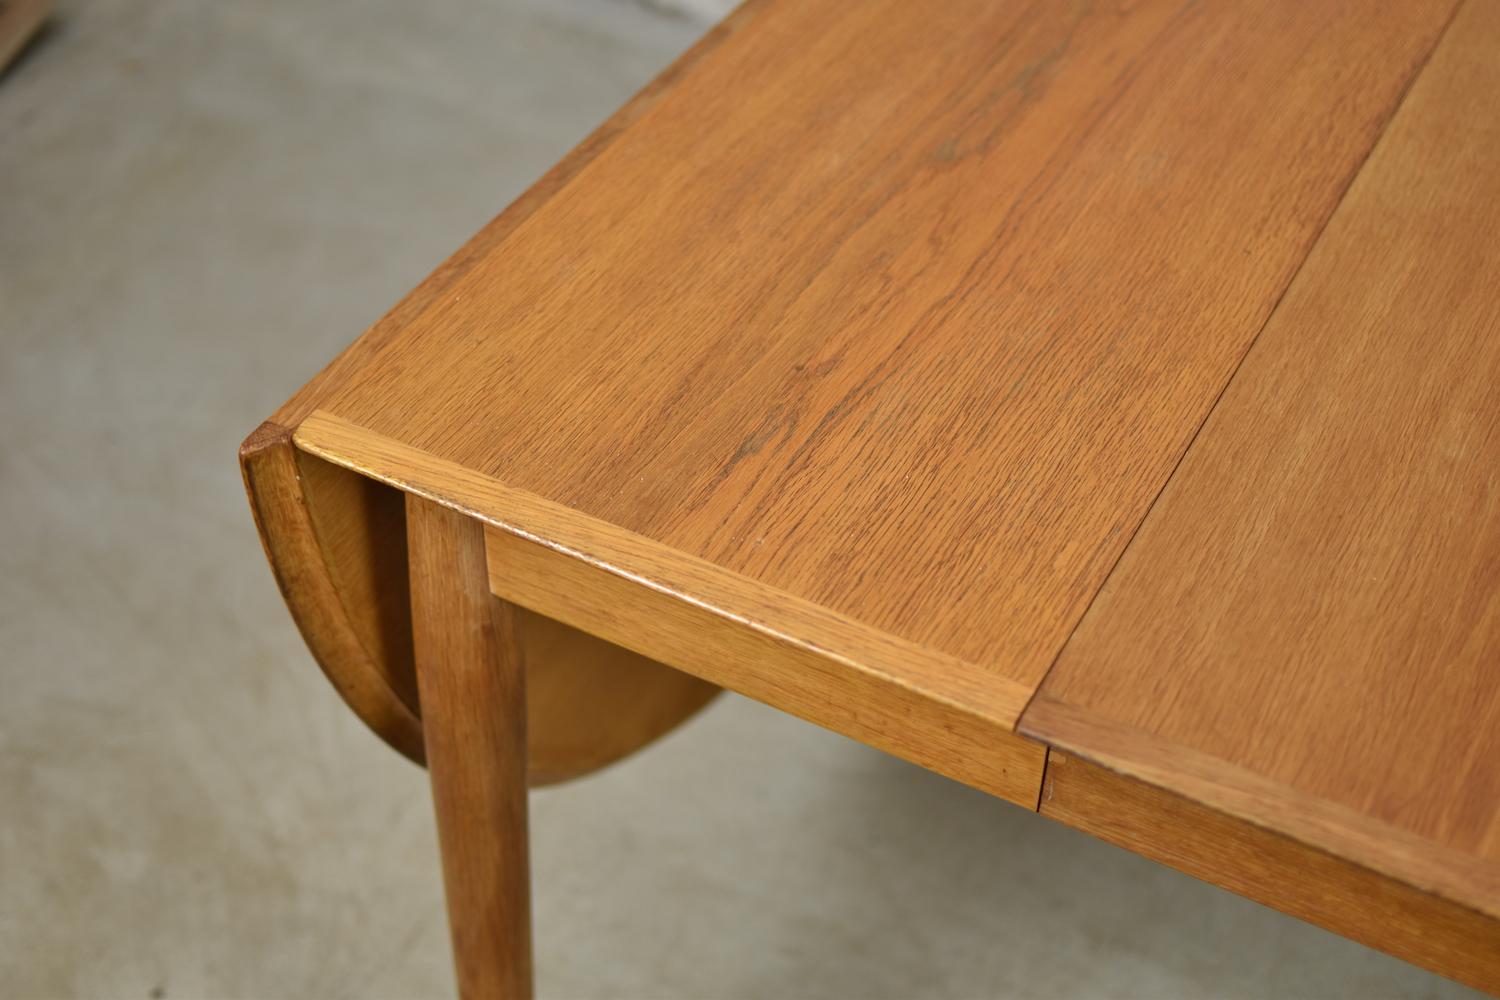 Mid-20th Century Drop-Leaf Dining Table by Arne Vodder for Sibast, Denmark, 1950s